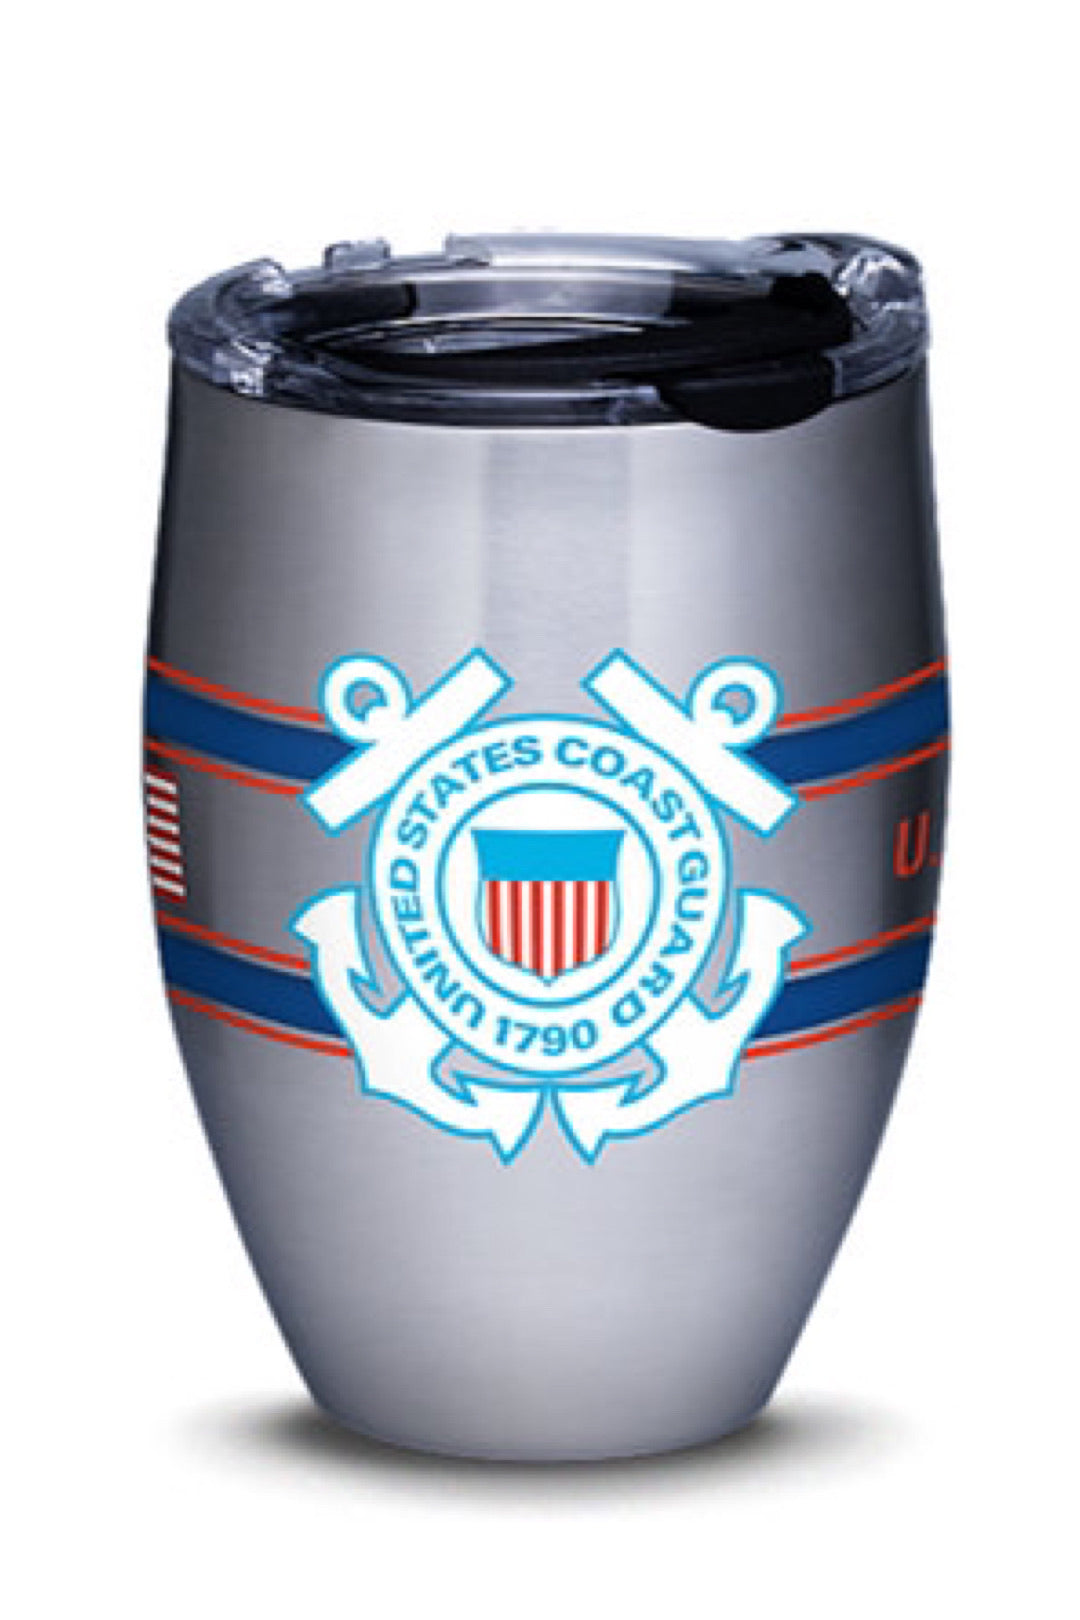 Coast Guard Camo Stripes Stainless Steel Drinkware by Tervis